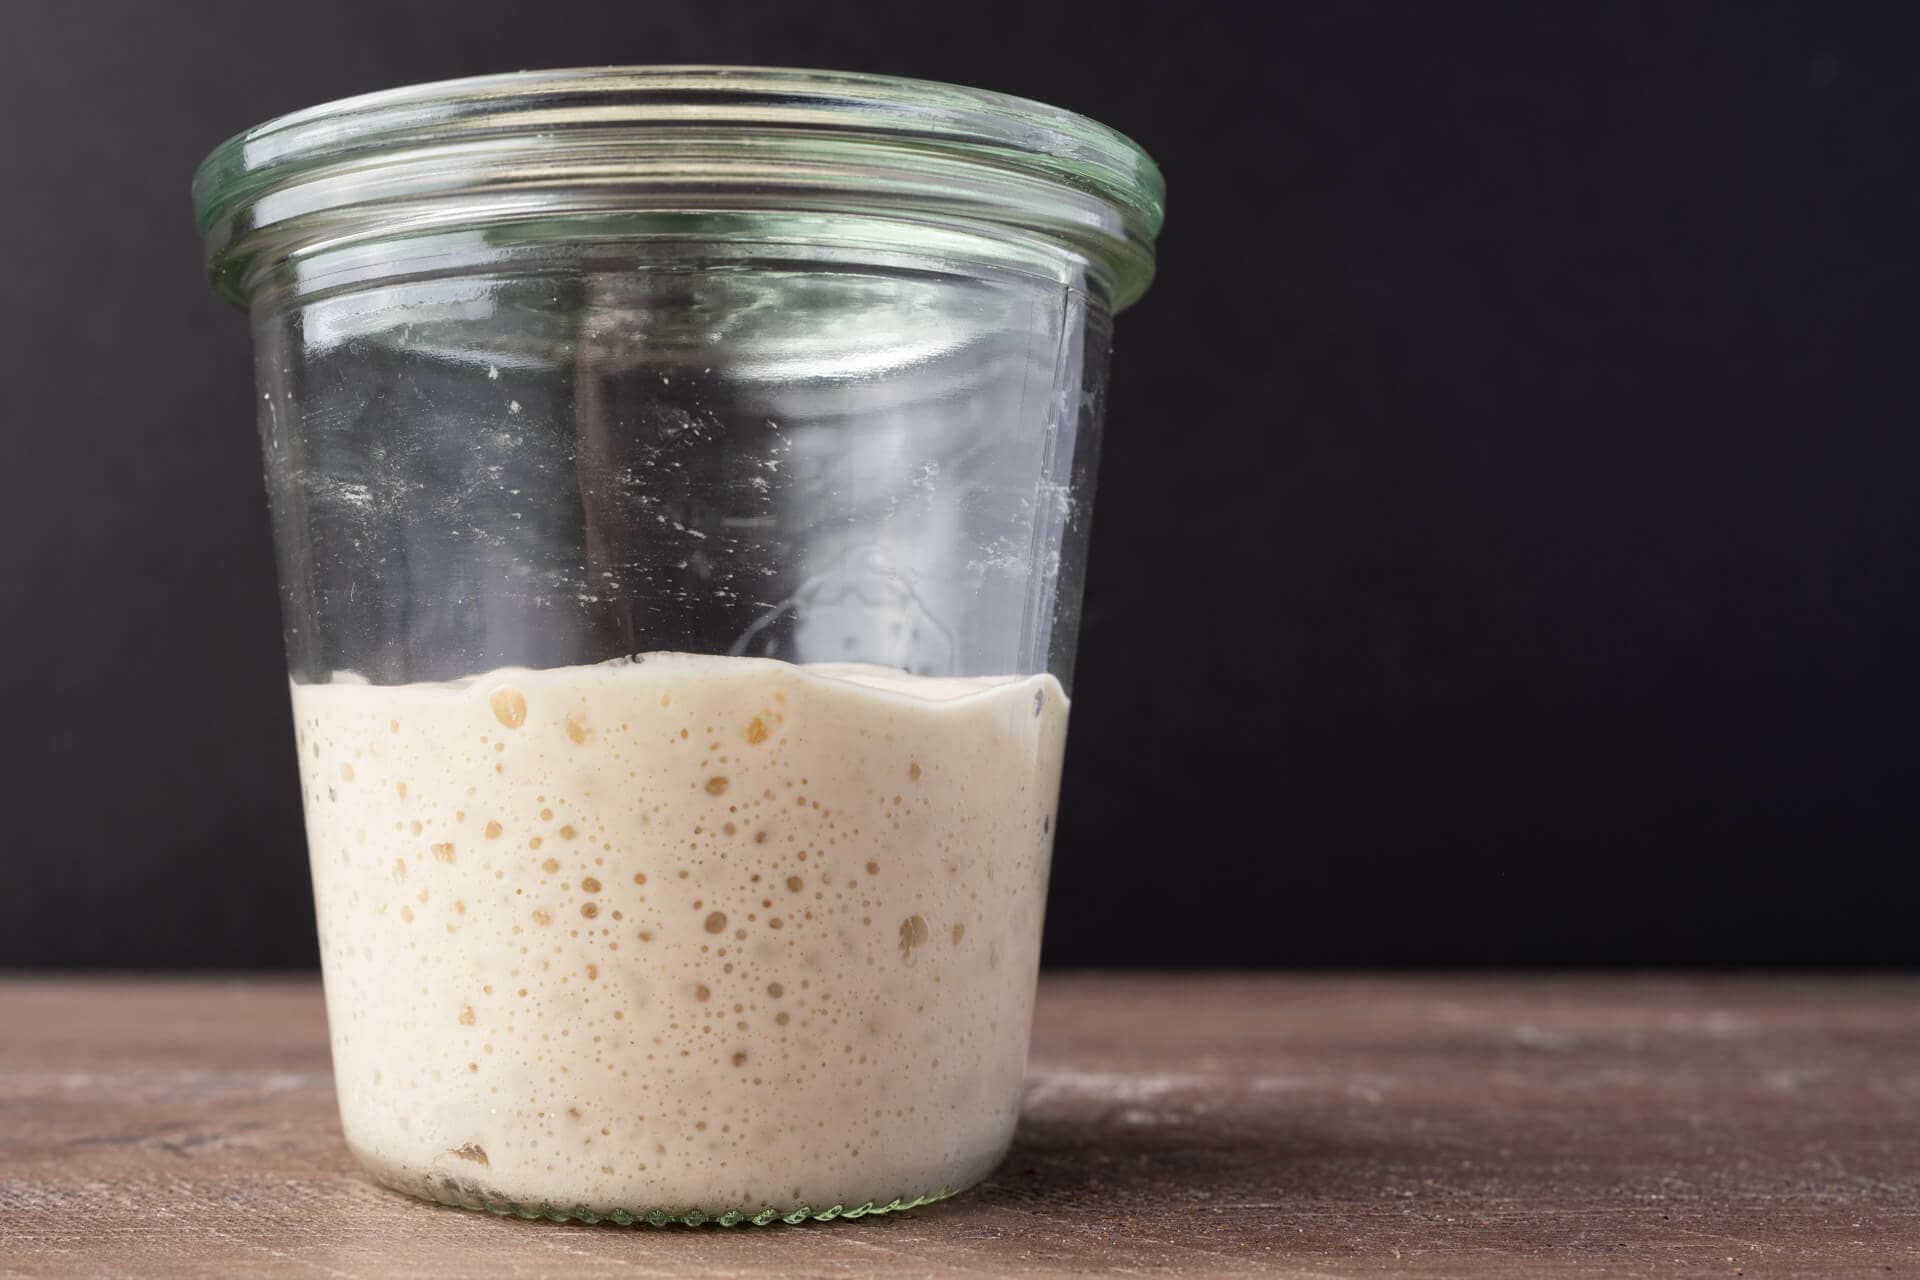 How Does Sourdough Starter Work and How to Get One Started? - The